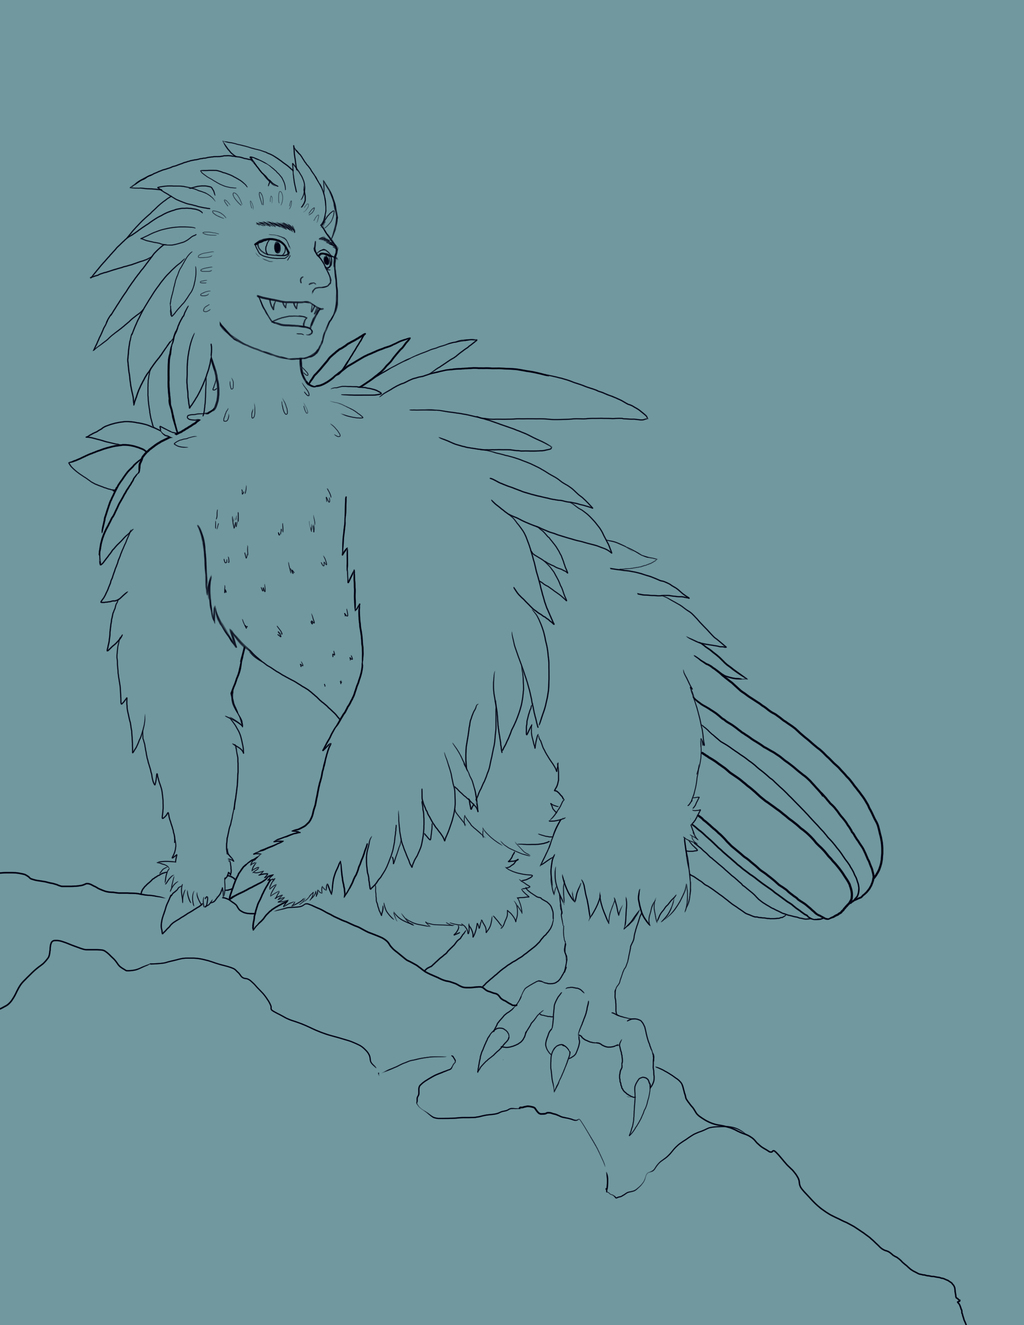 Most recent image: Harpy lineart